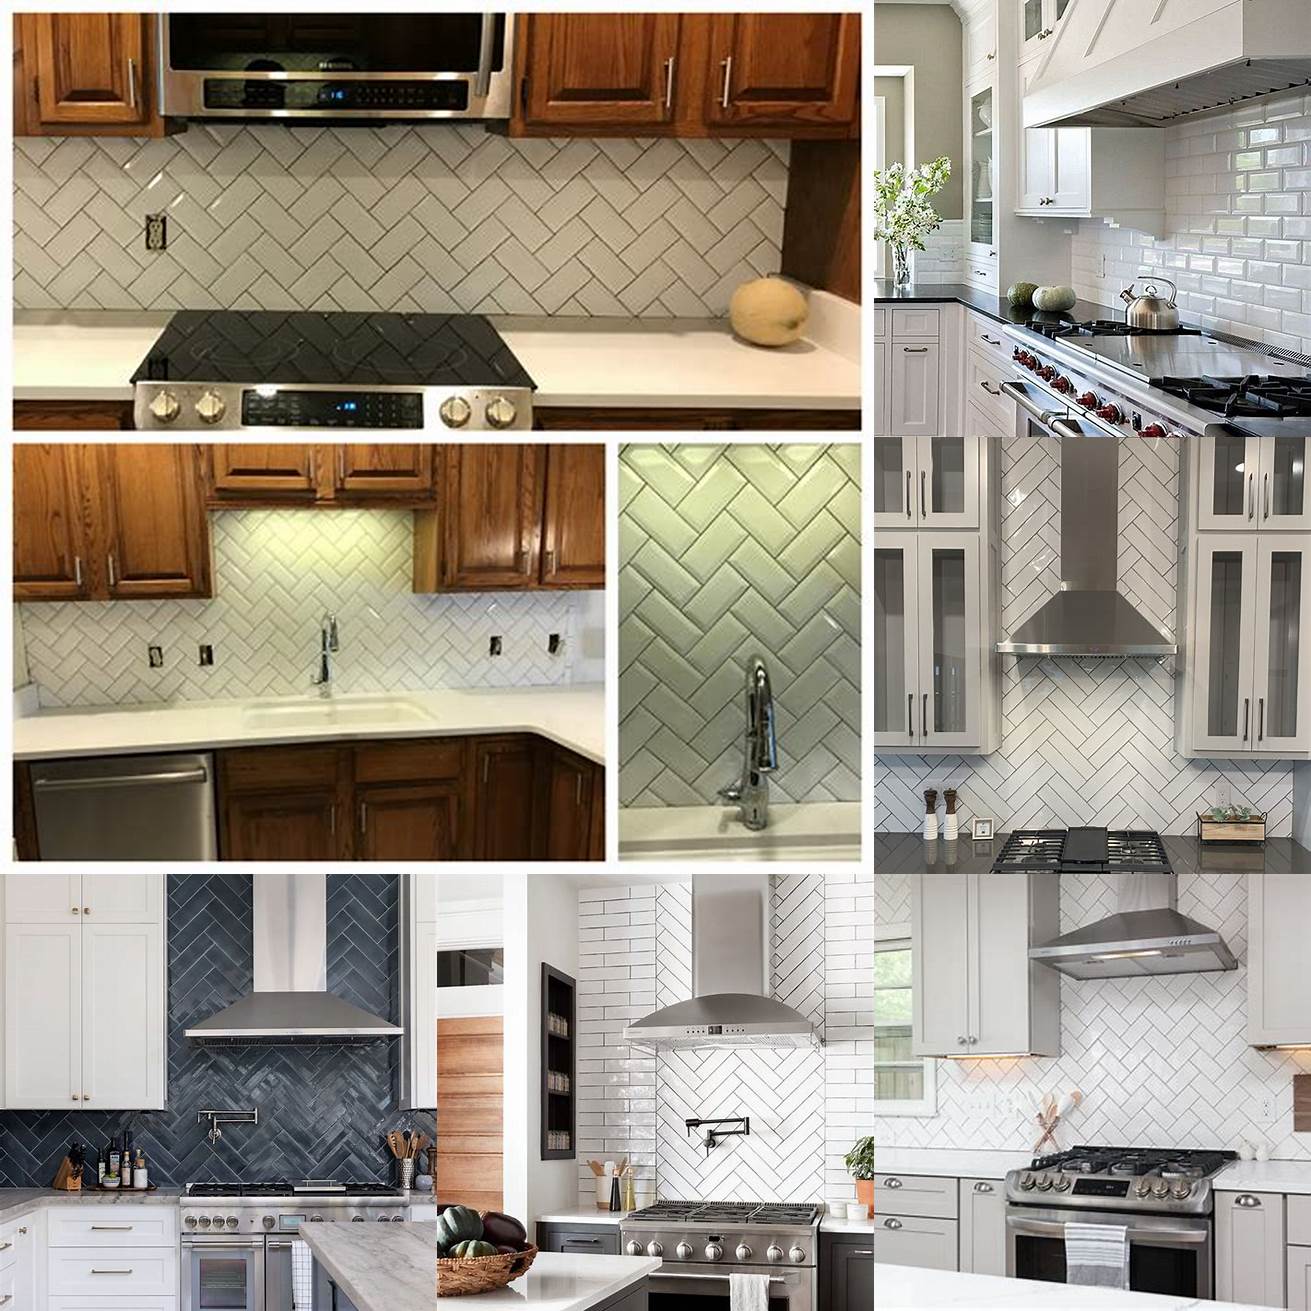 6 Subway Tile Kitchen with Patterned Tiles